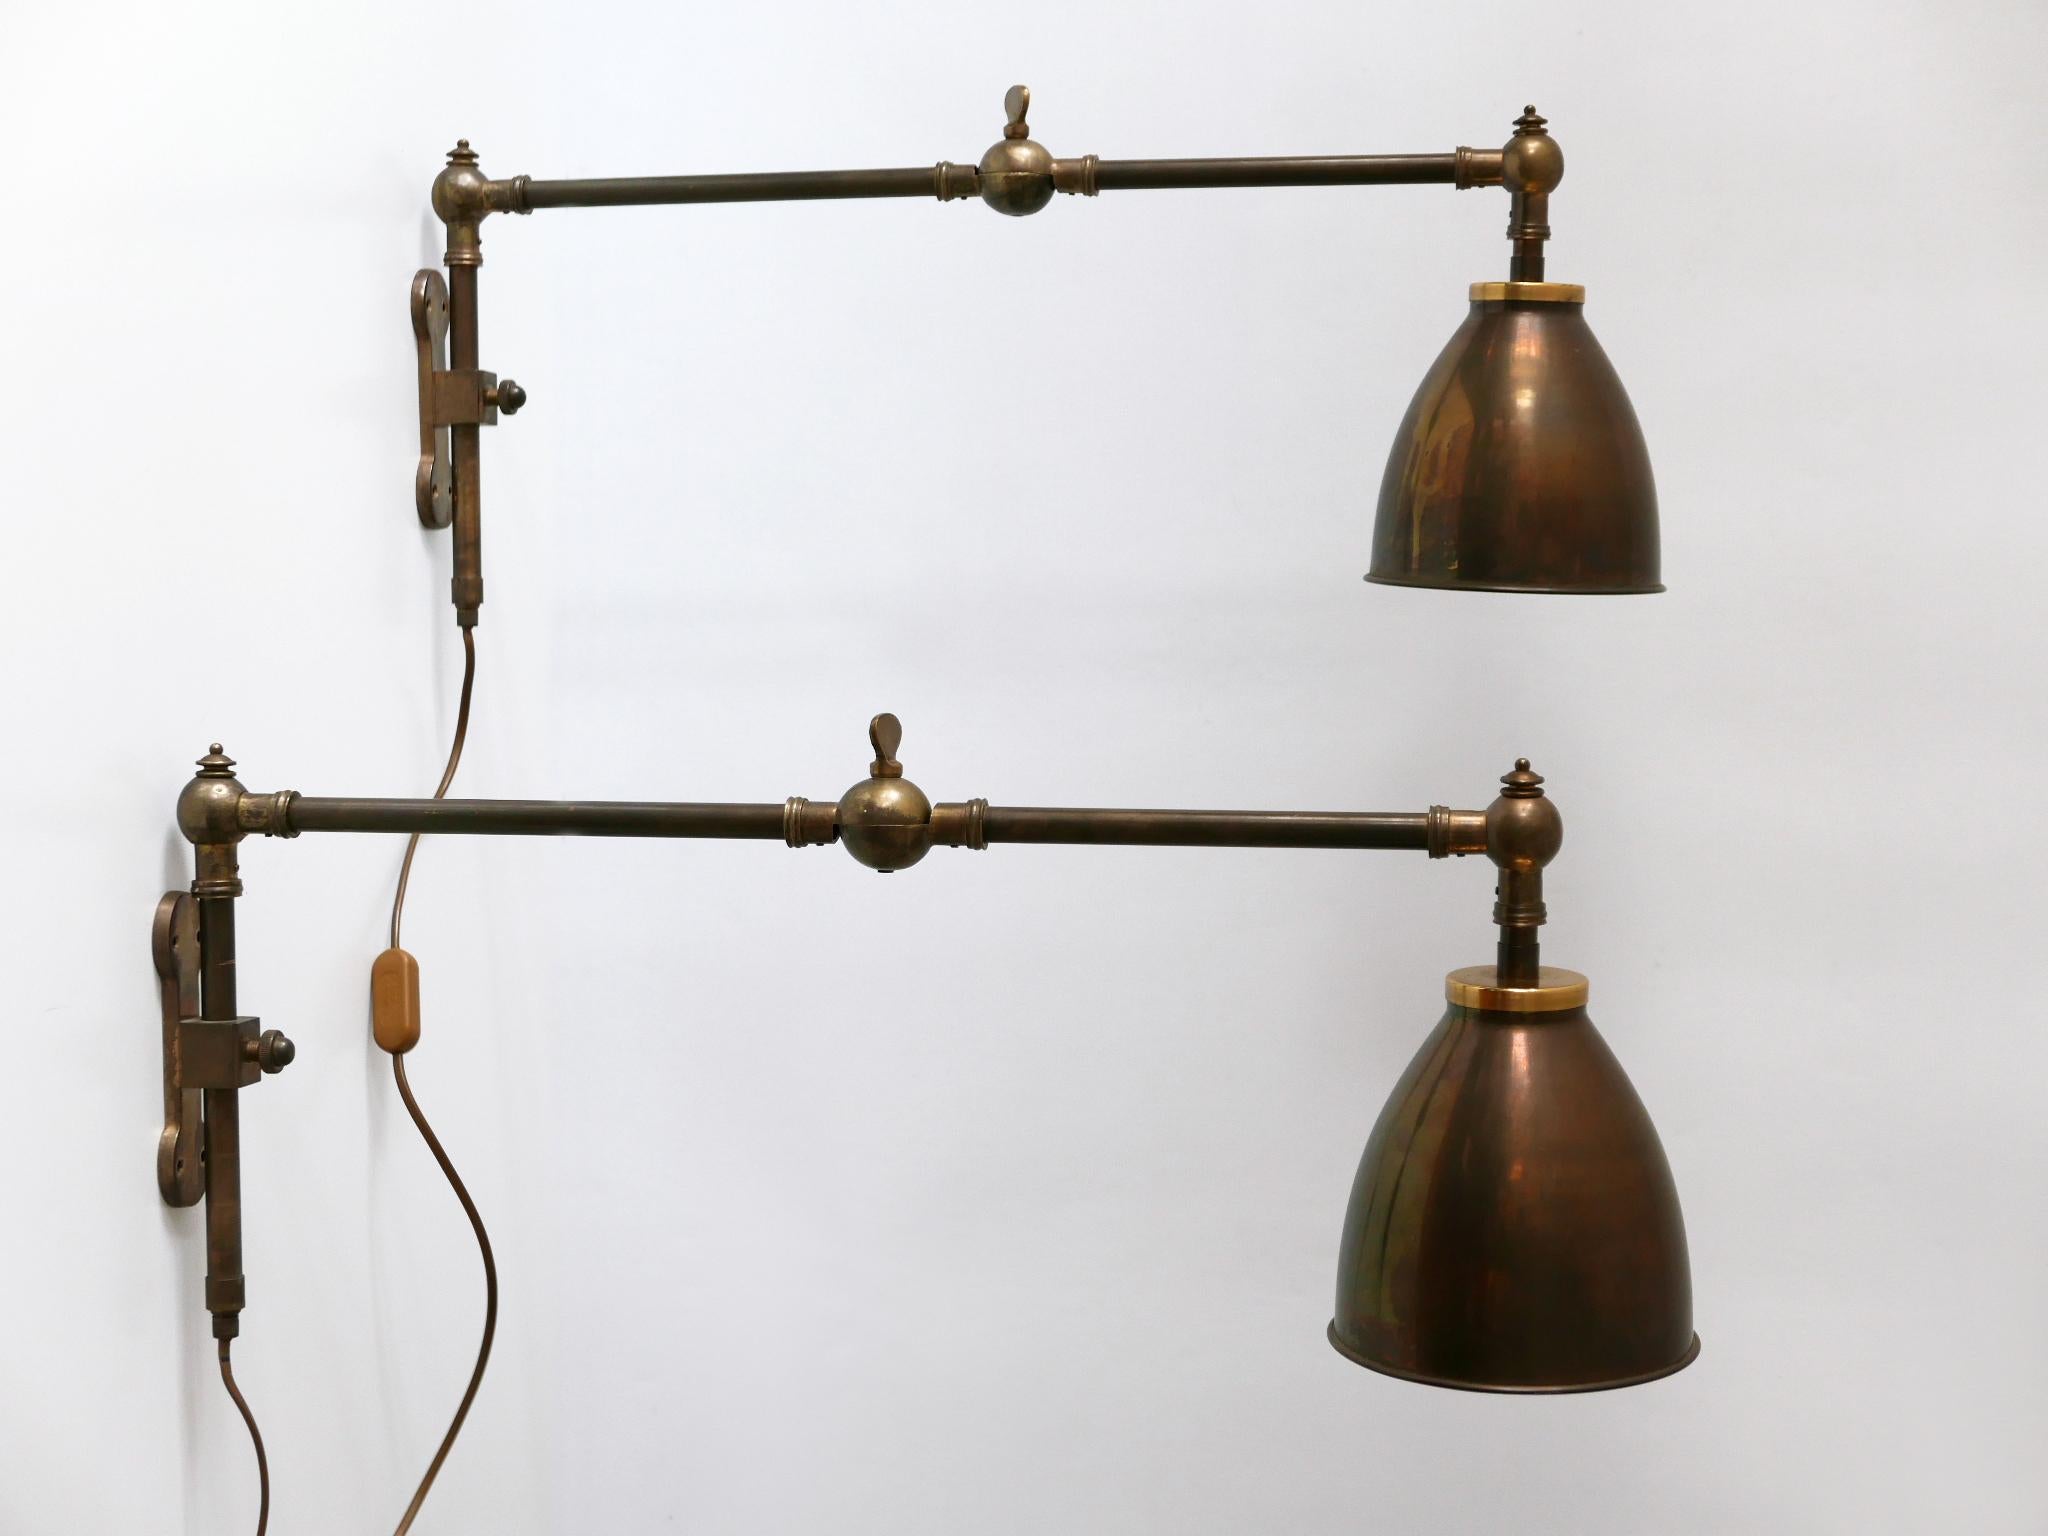 Set of two elegant Mid Century Modern swing brass wall lamps or reading lights. Designed and manufactured in Germany, 1970s.

Adjustable height and arm. Interrupter on the cord.

Executed in bronze patinated brass, each lamp needs 1 x E27 / E26